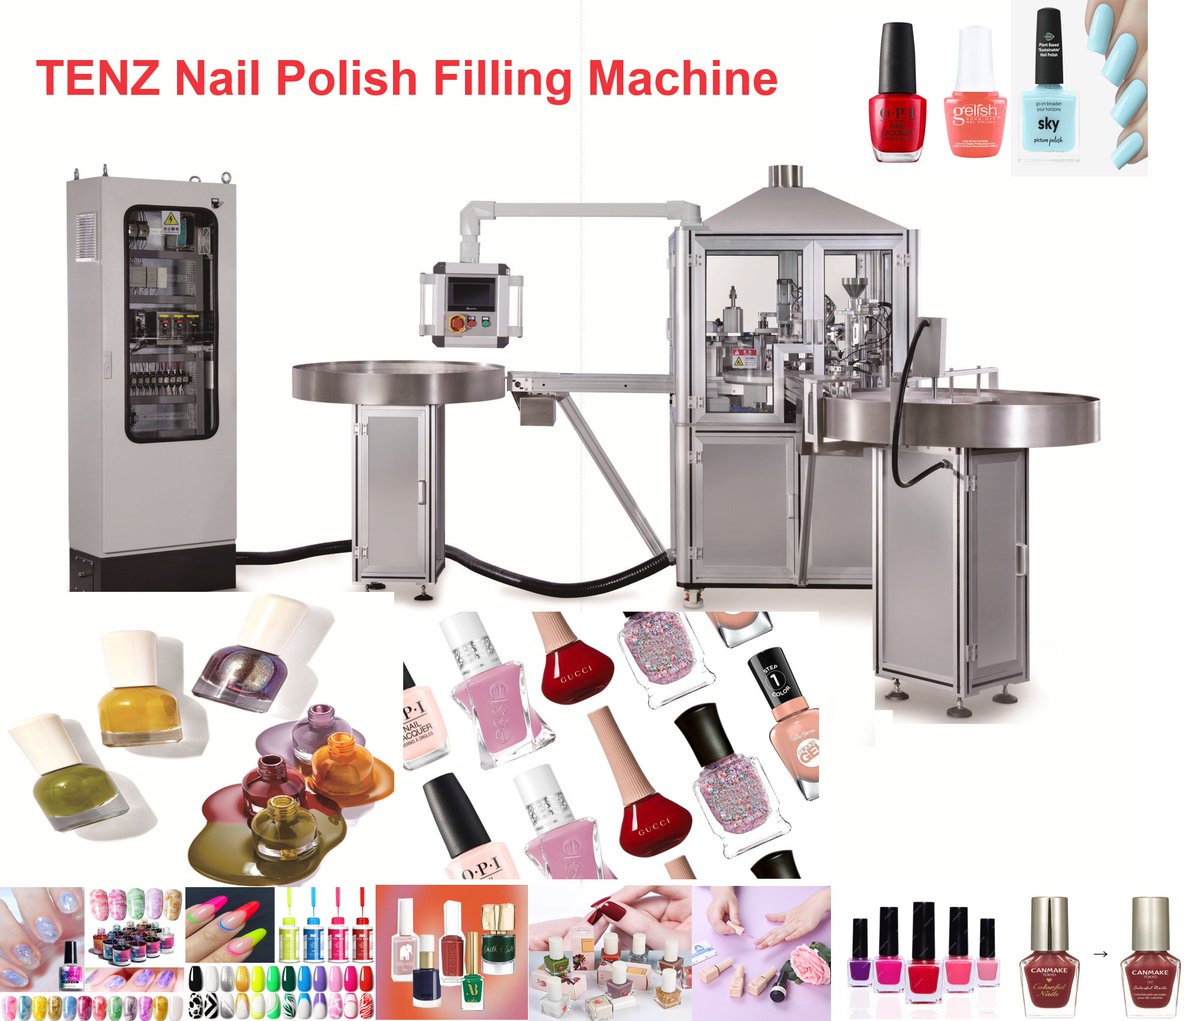 Revolutionize Your Nail Polish Manufacturing TENZ Fully Automatic Turntable Nail Polish Filling Machine Streamline Production with Unmatched Precision and Speed
#nailpolishfilling #cosmeticindustry #nailpolishremover #automationsolutions #beautyindustry #industrialmachinery